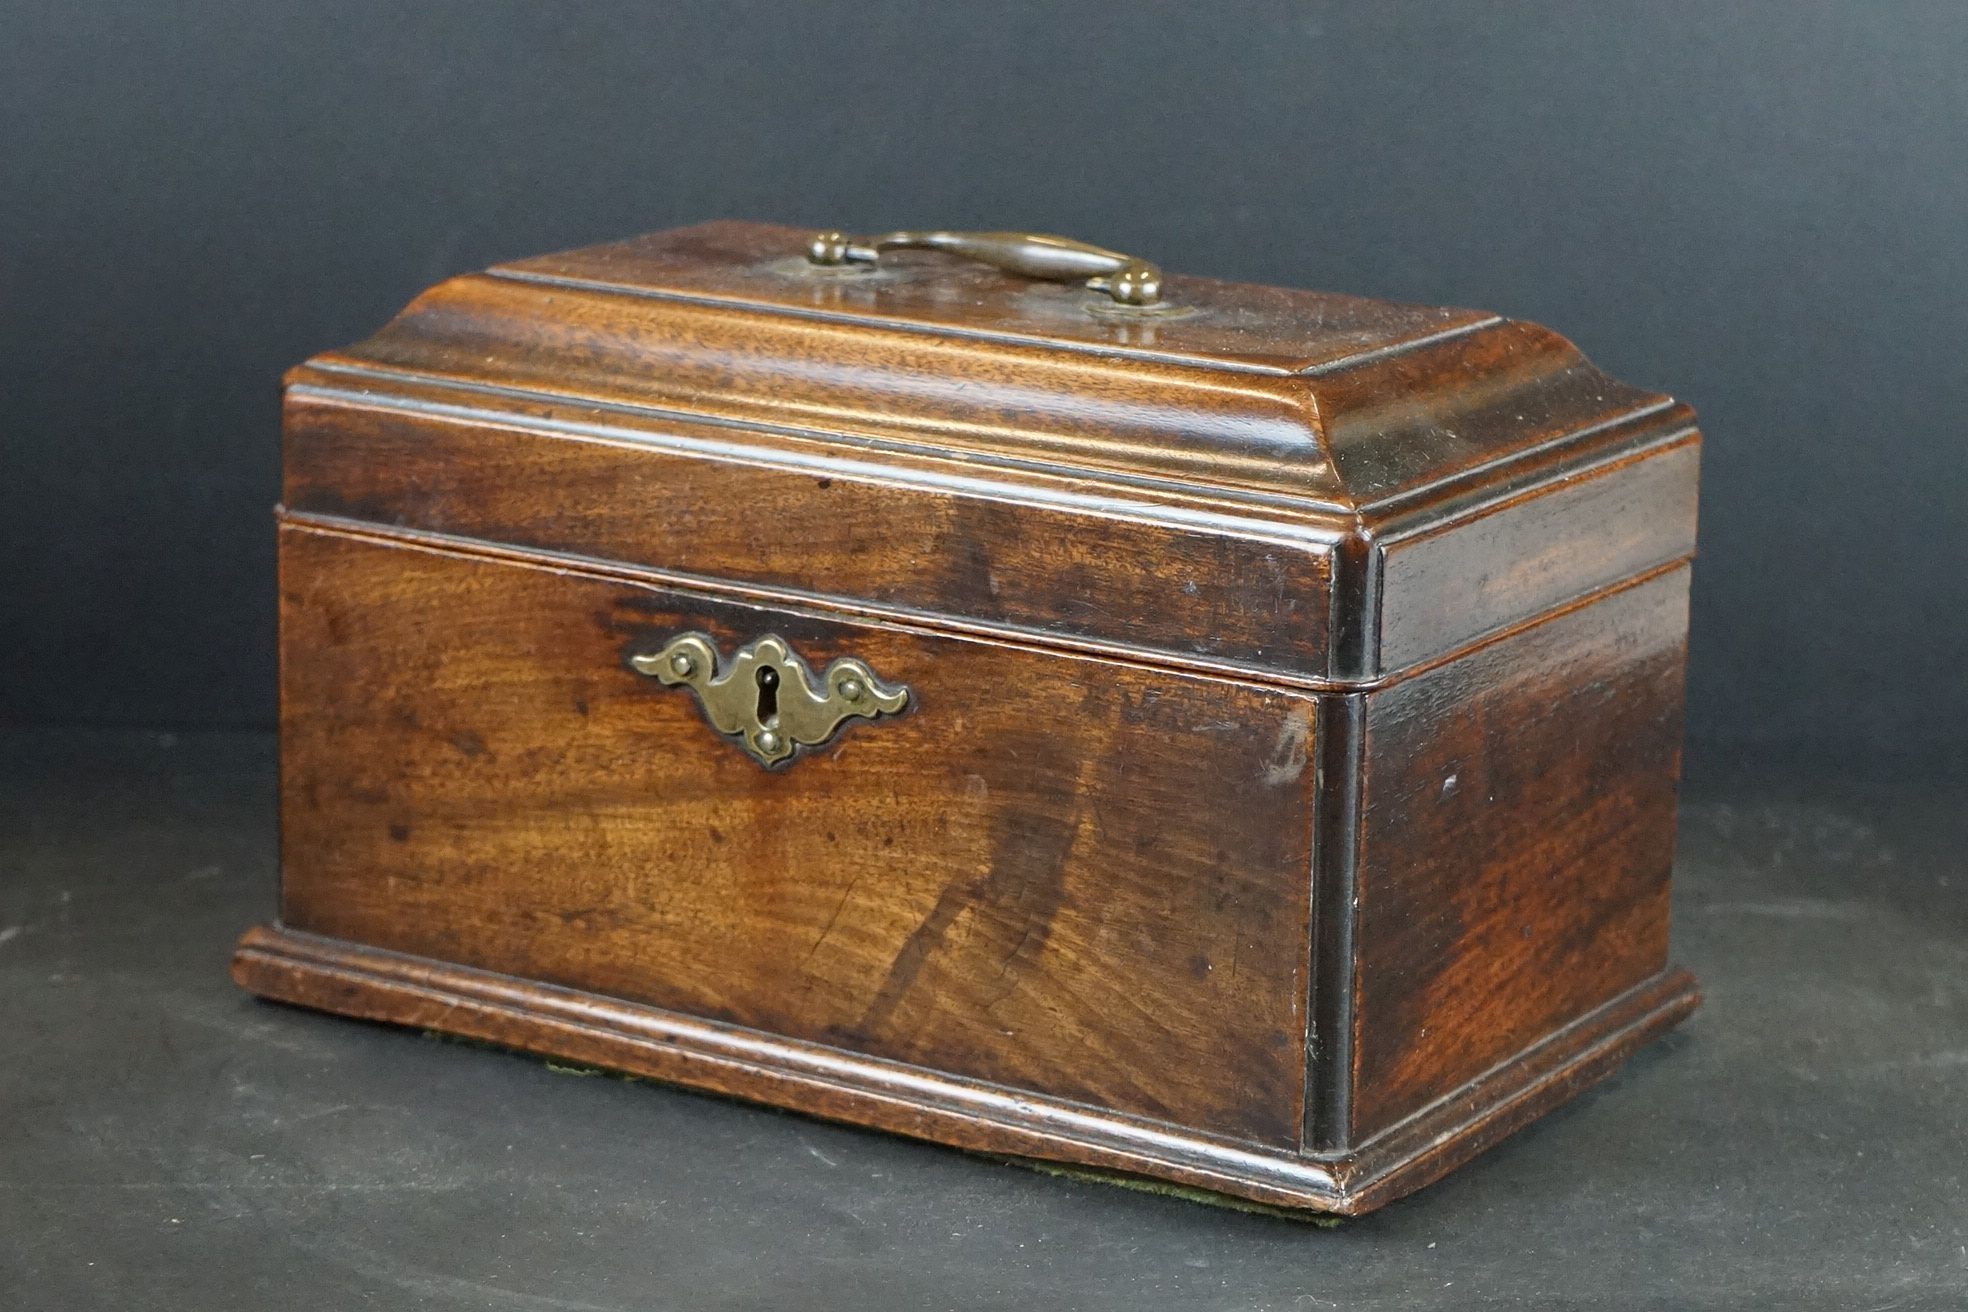 An antique wooden lidded box with brass fittings - Image 2 of 7